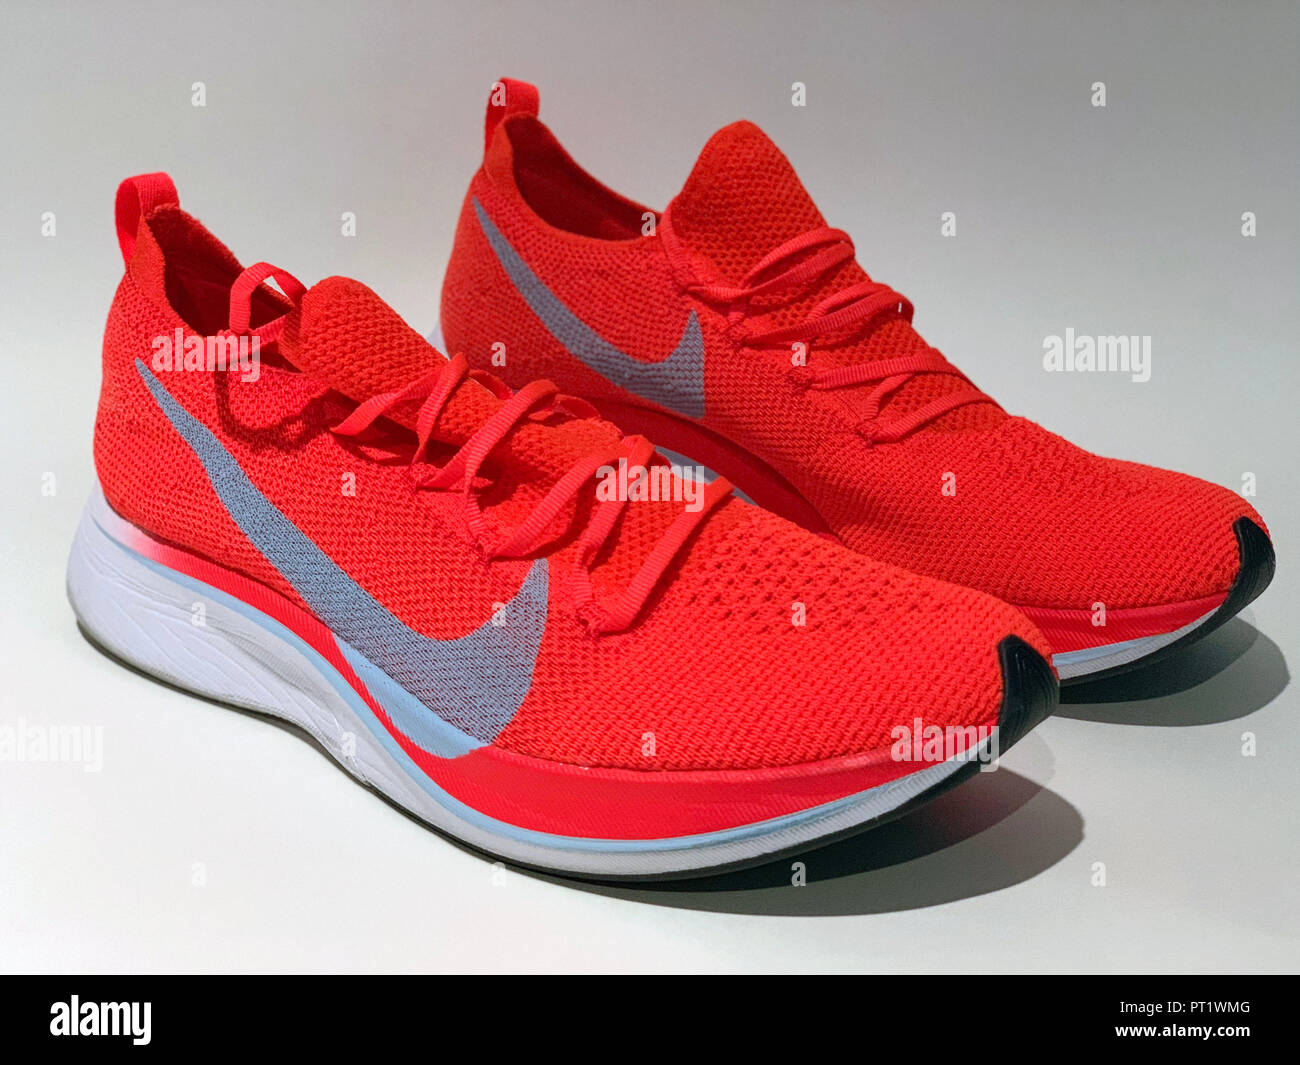 nevel Impressionisme rijst Los Angeles, United States. 05th Oct, 2018. Detailed view of the Nike  VaporFly 4% Flyknit running shoe released on Thursday, Oct.4, 2018. The  racing flat features an ultra-light, uber-responsive ZoomX foam and